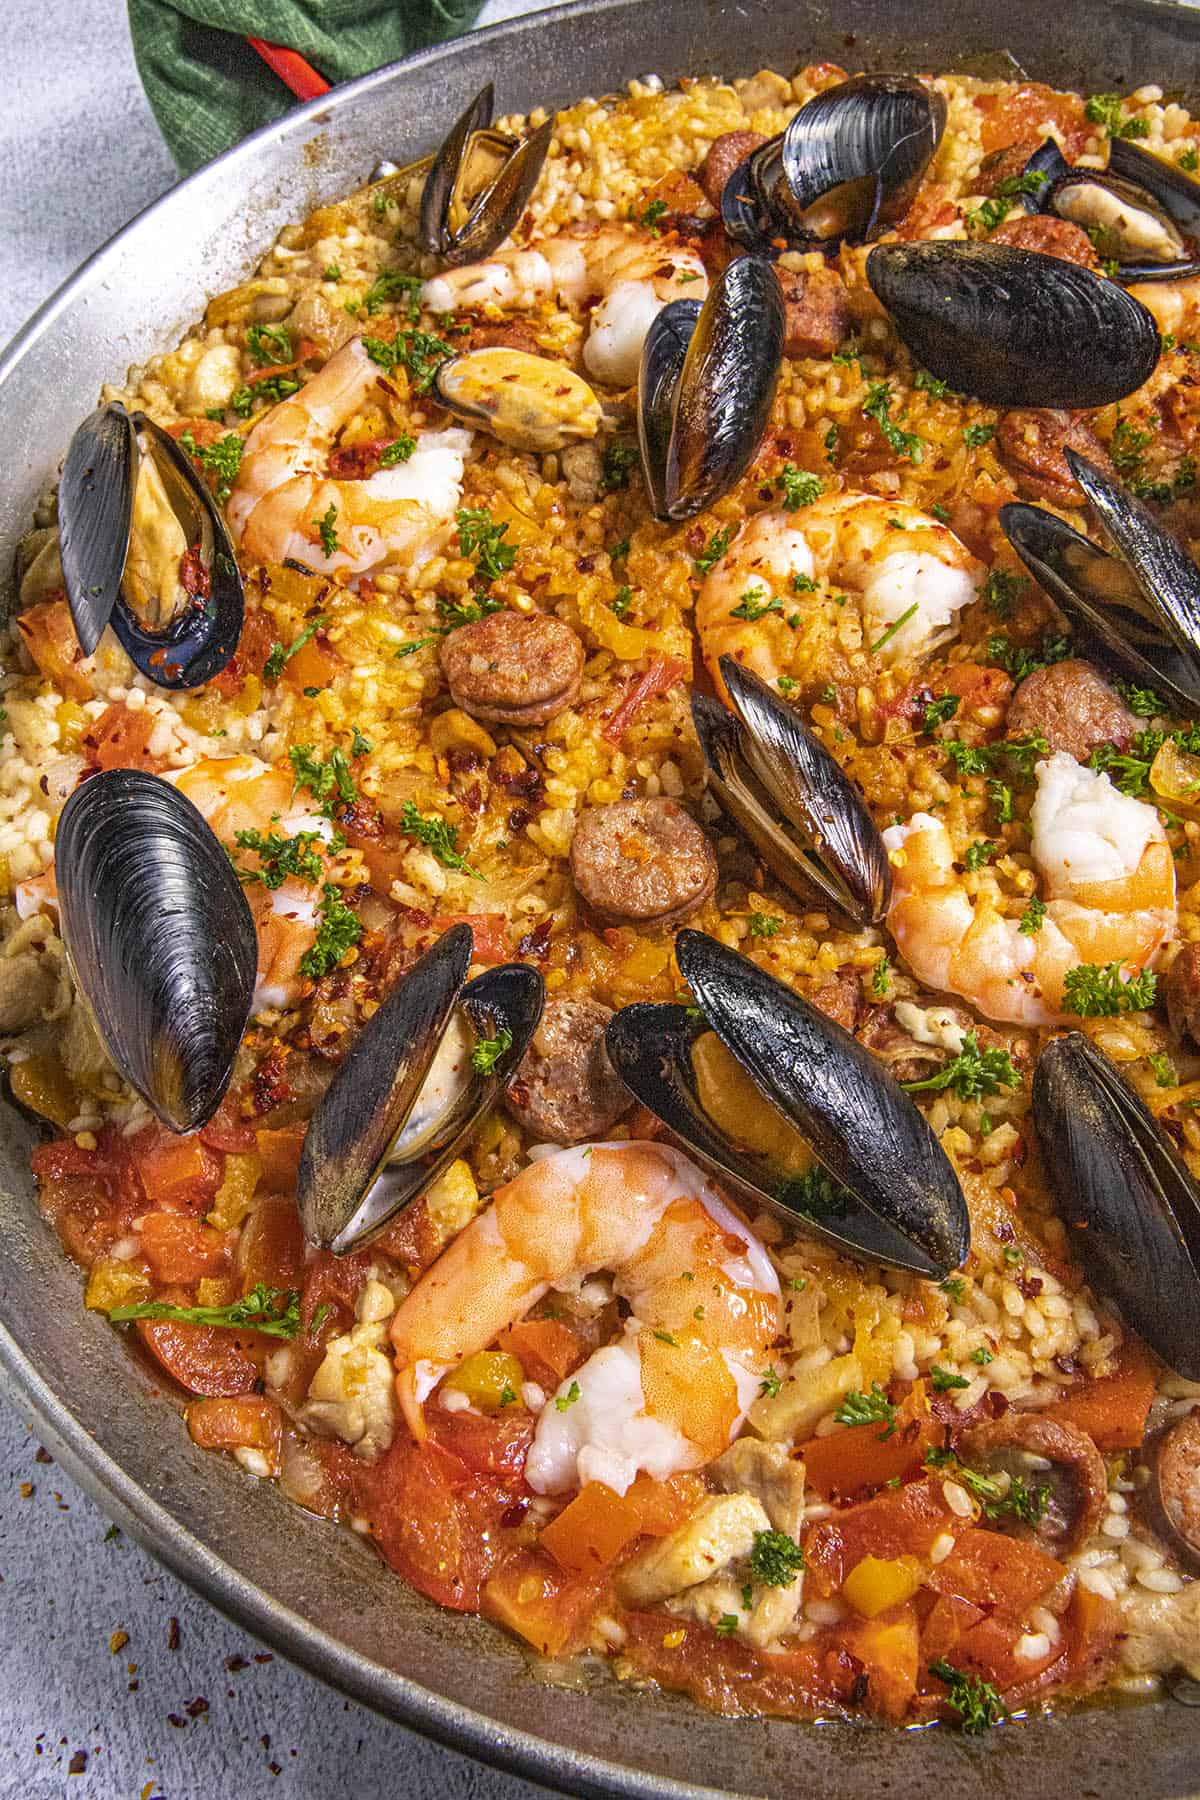 Paella in a pan with mussels, shrimp, sausage, and chicken